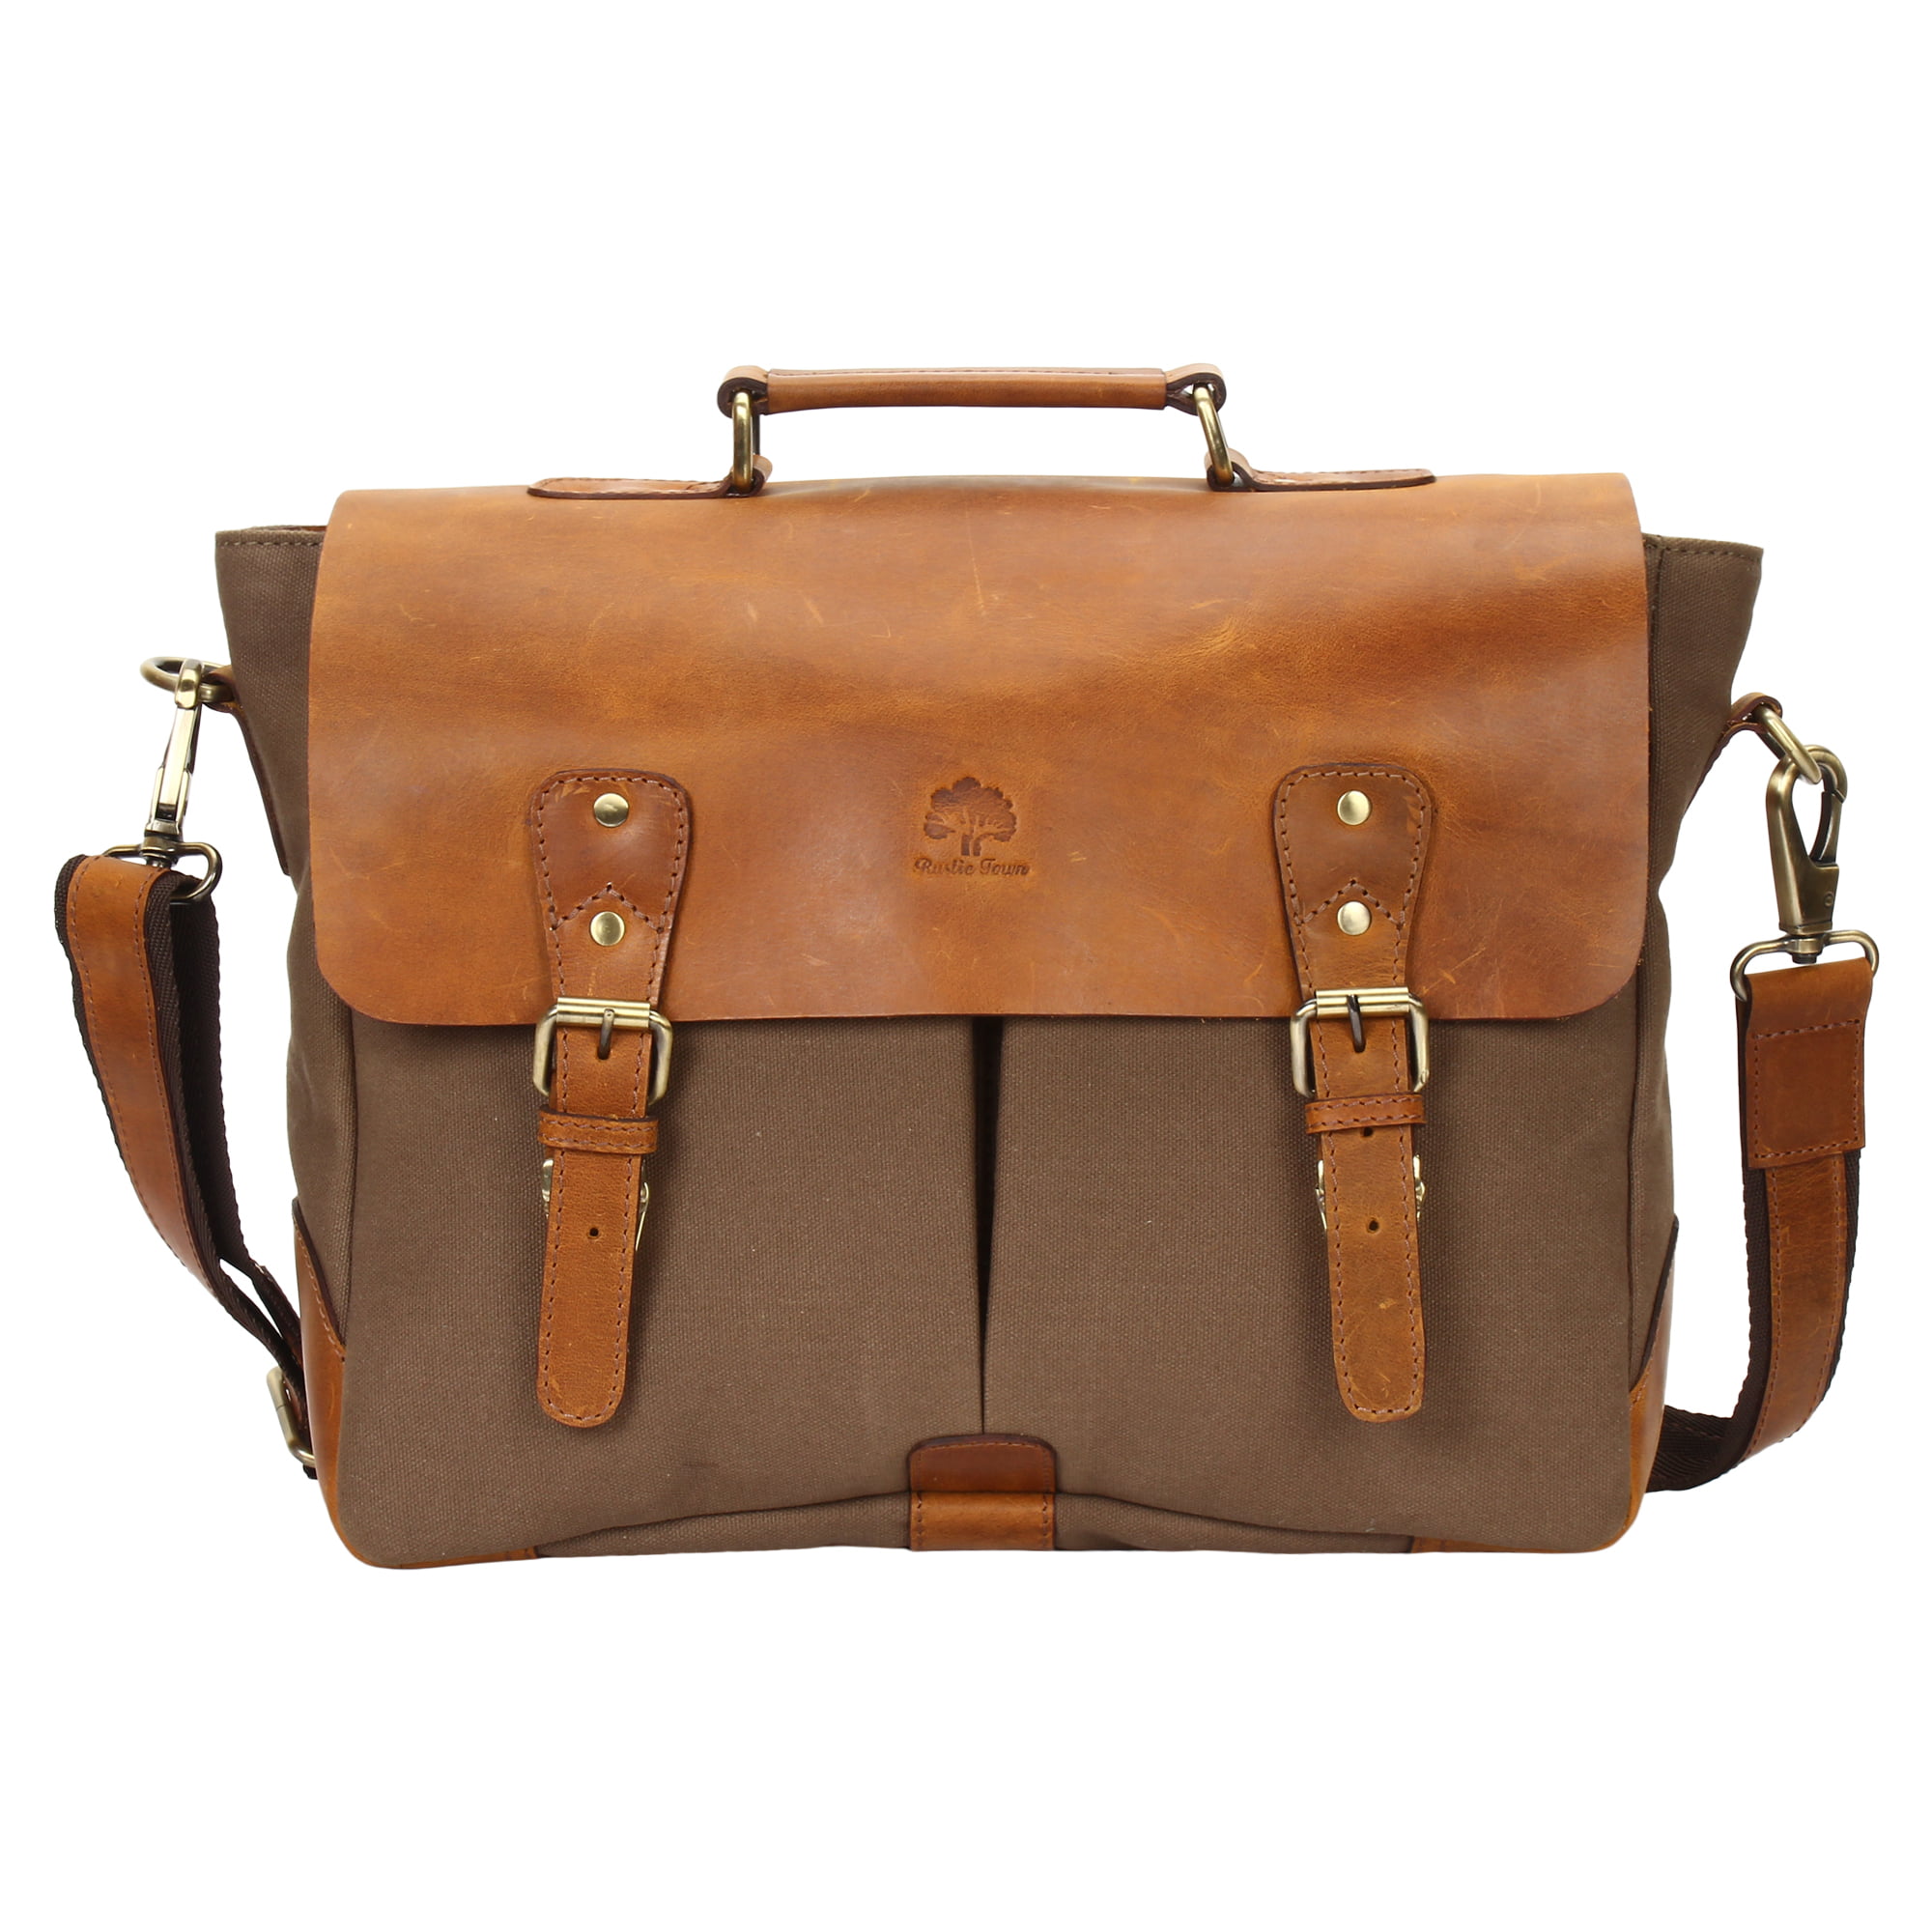 15 Inch Rustic Town Handmade Leather Canvas Vintage Crossbody Messenger ...